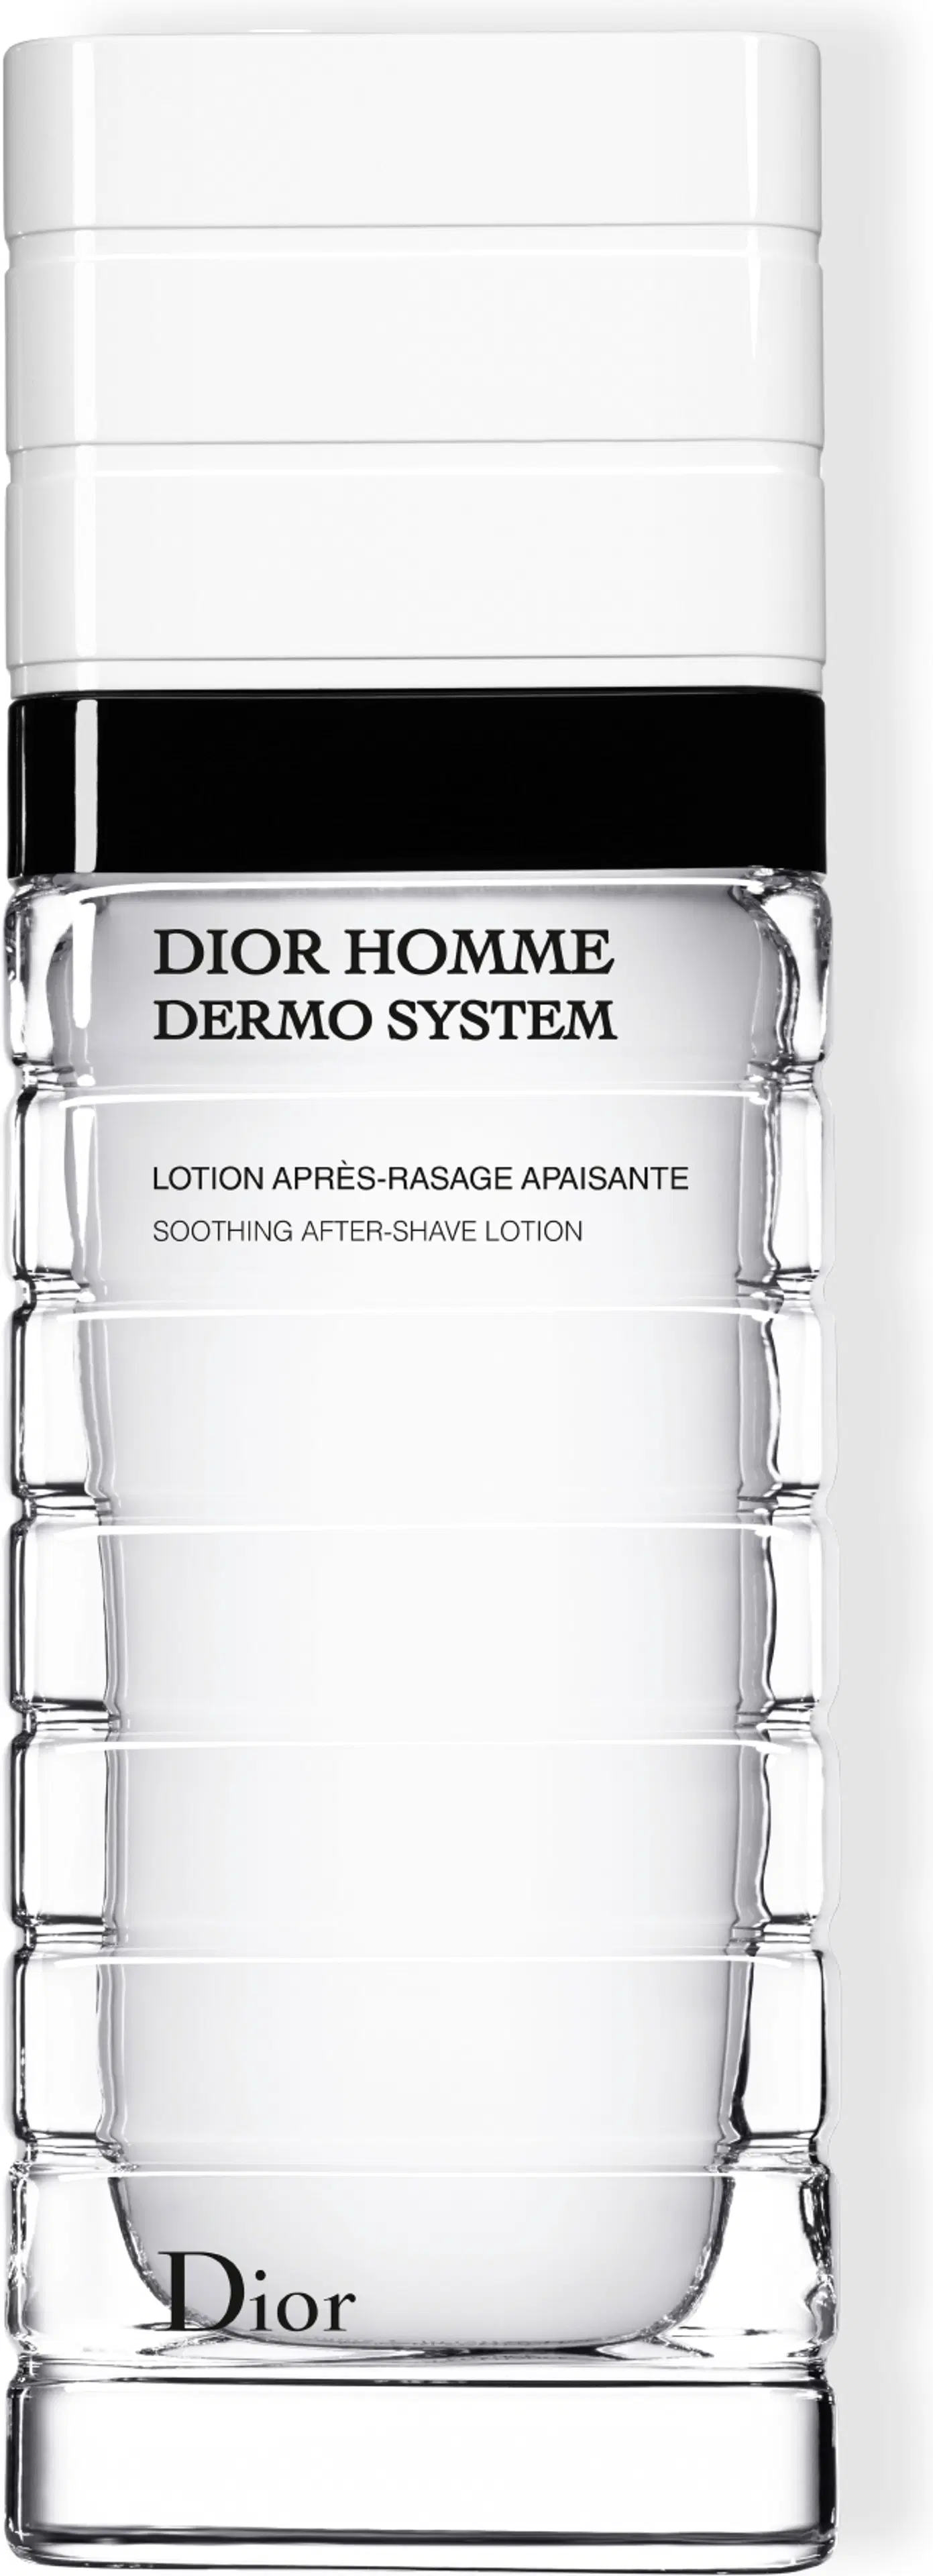 DIOR Homme Dermo System Shooting After-shave Lotion 100 ml